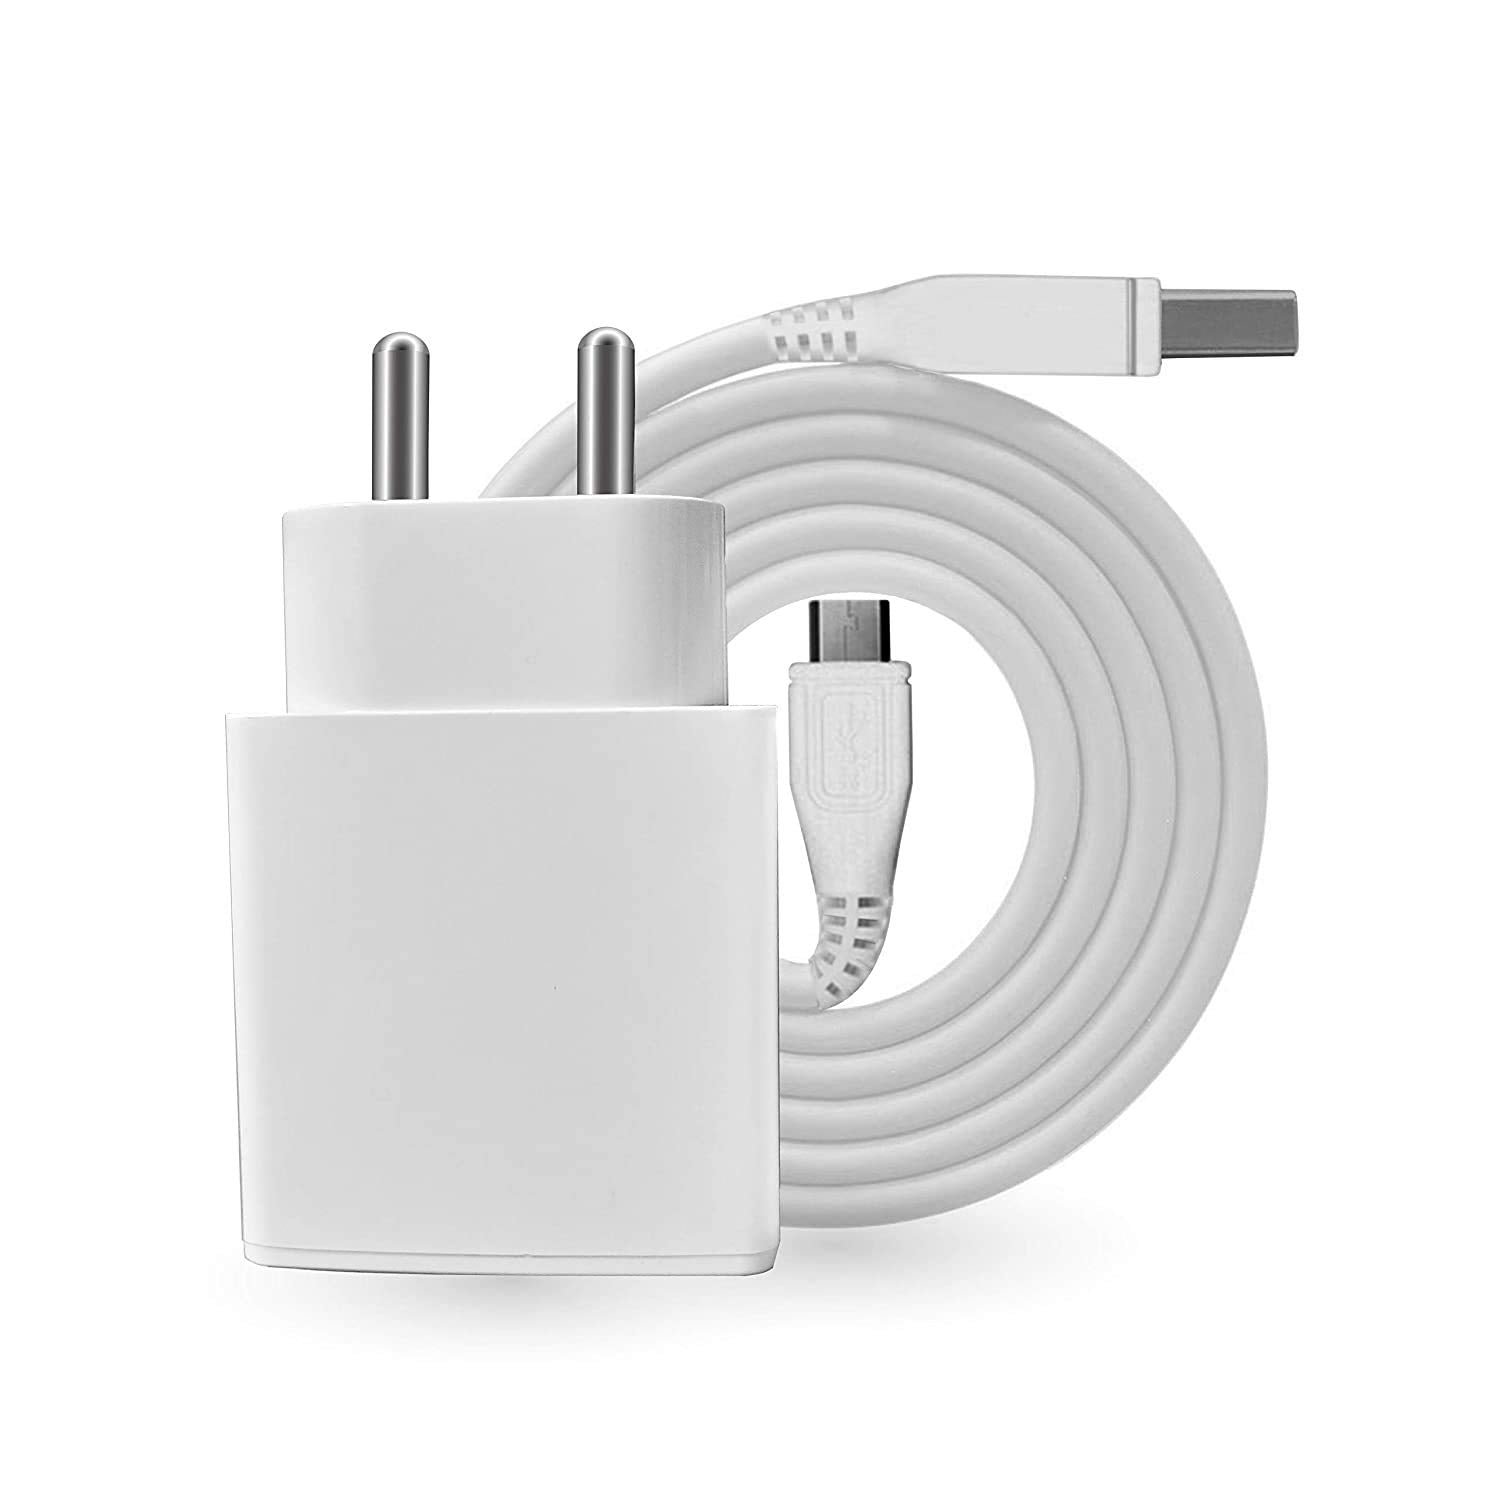 Vivo Y71i 2 Amp Fast Mobile Charger with Cable